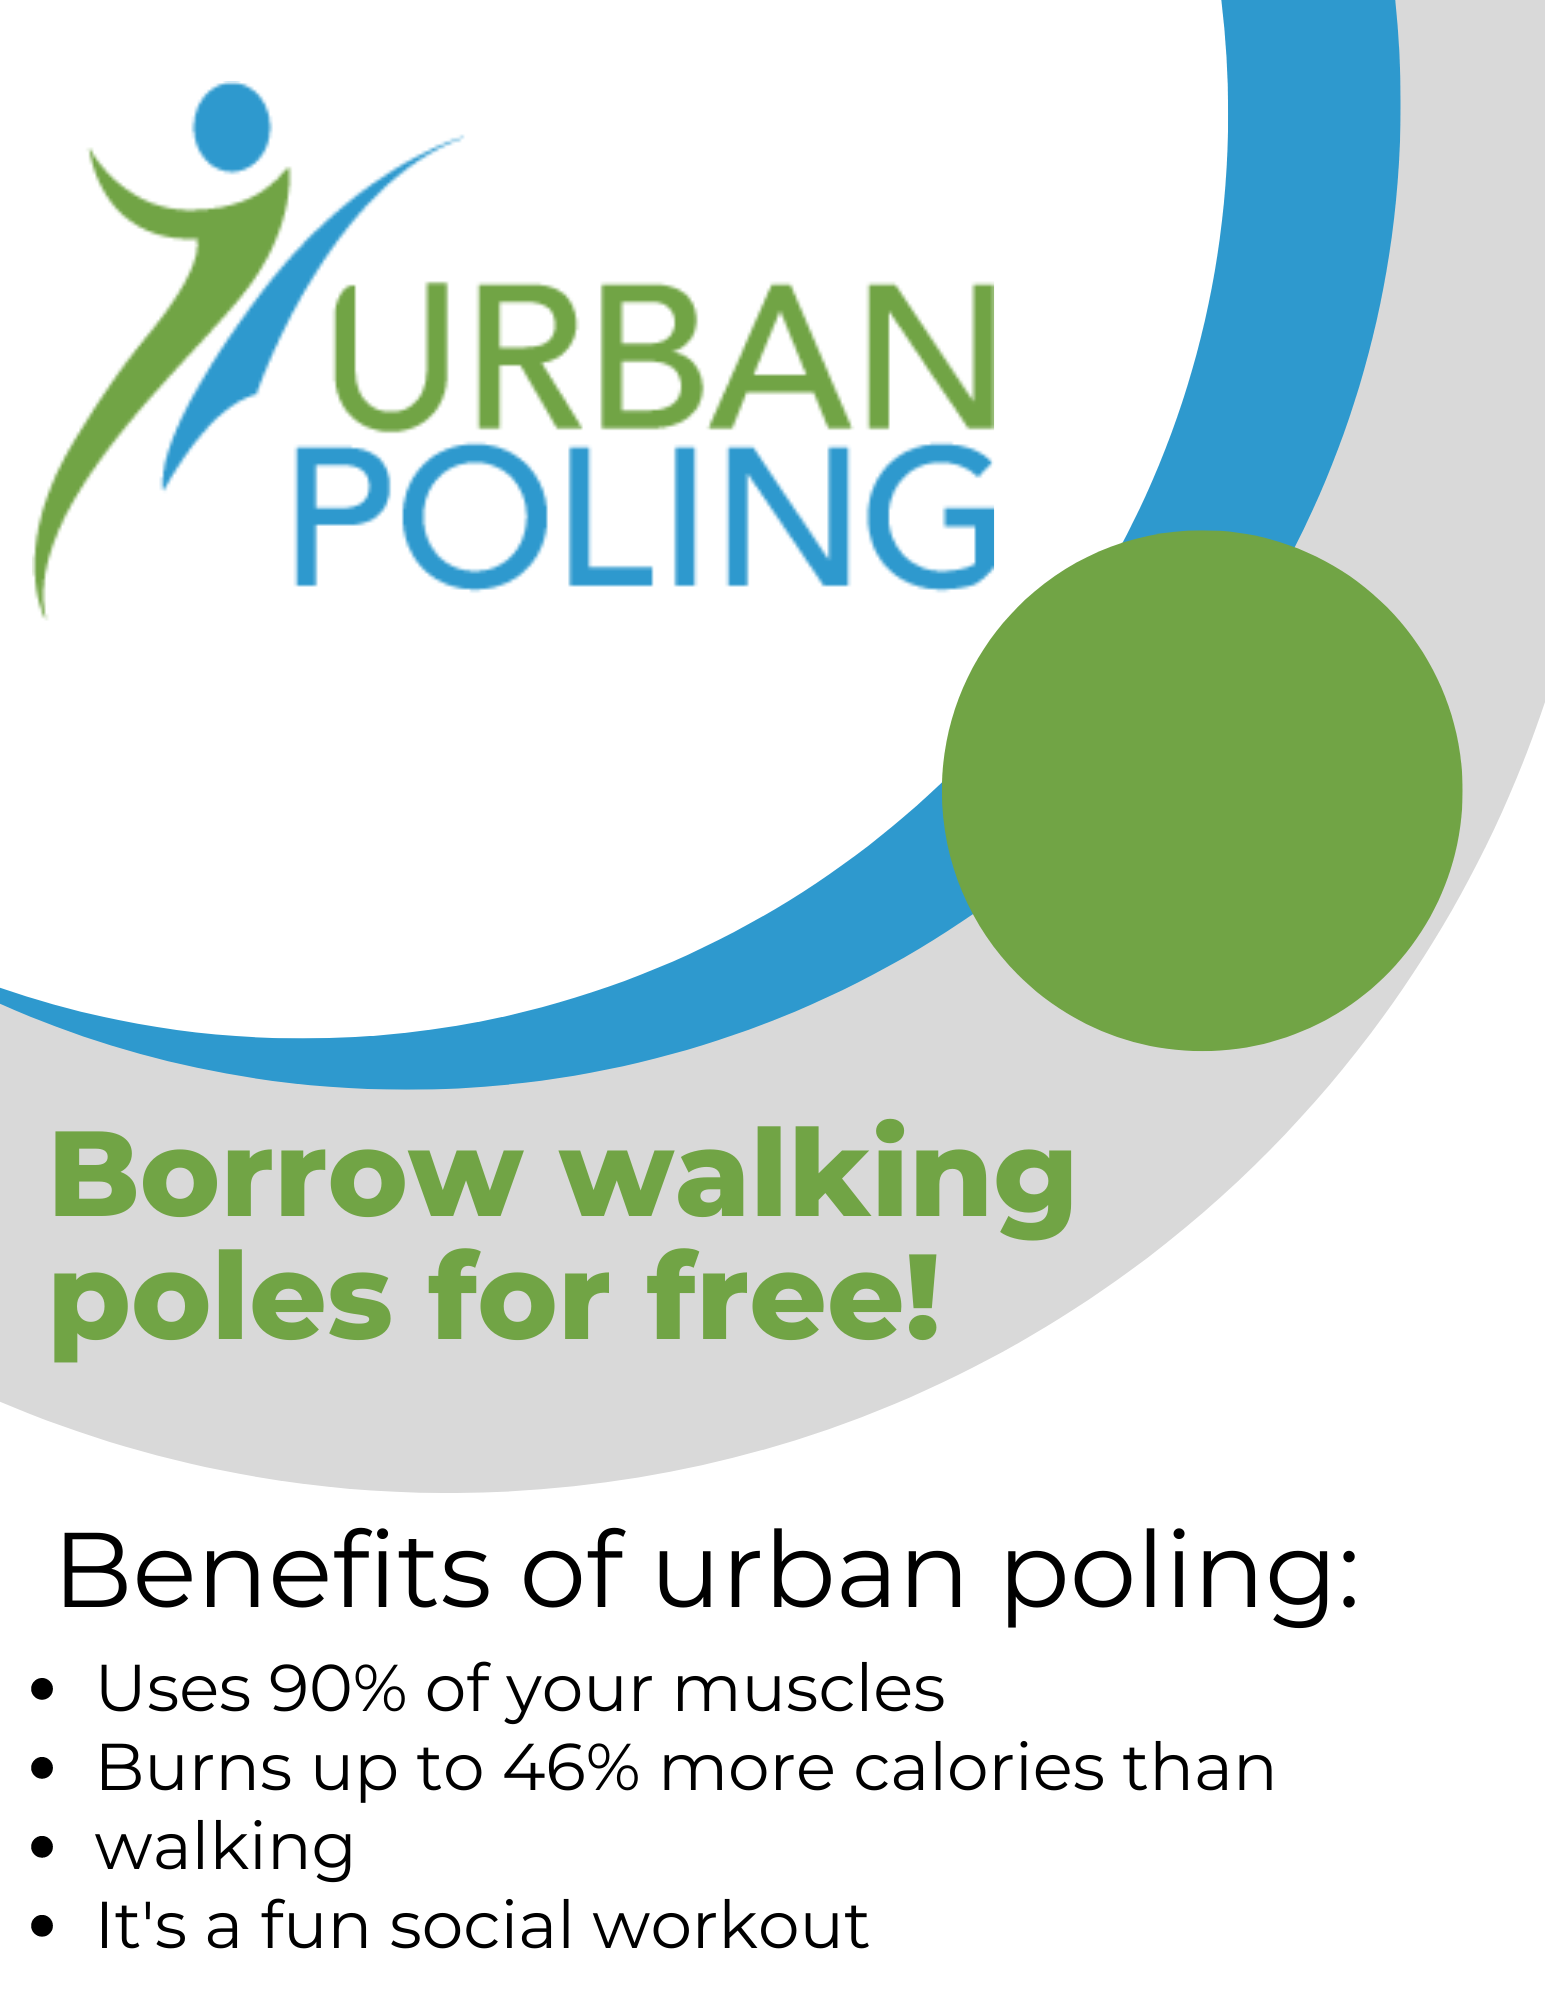 Poster indicating that you can borrow walking poles for free from the library. Benefits of urban poling are that it uses 90% of your muscles, burns up to 46% more calories than walking, and it's a fun social workout.